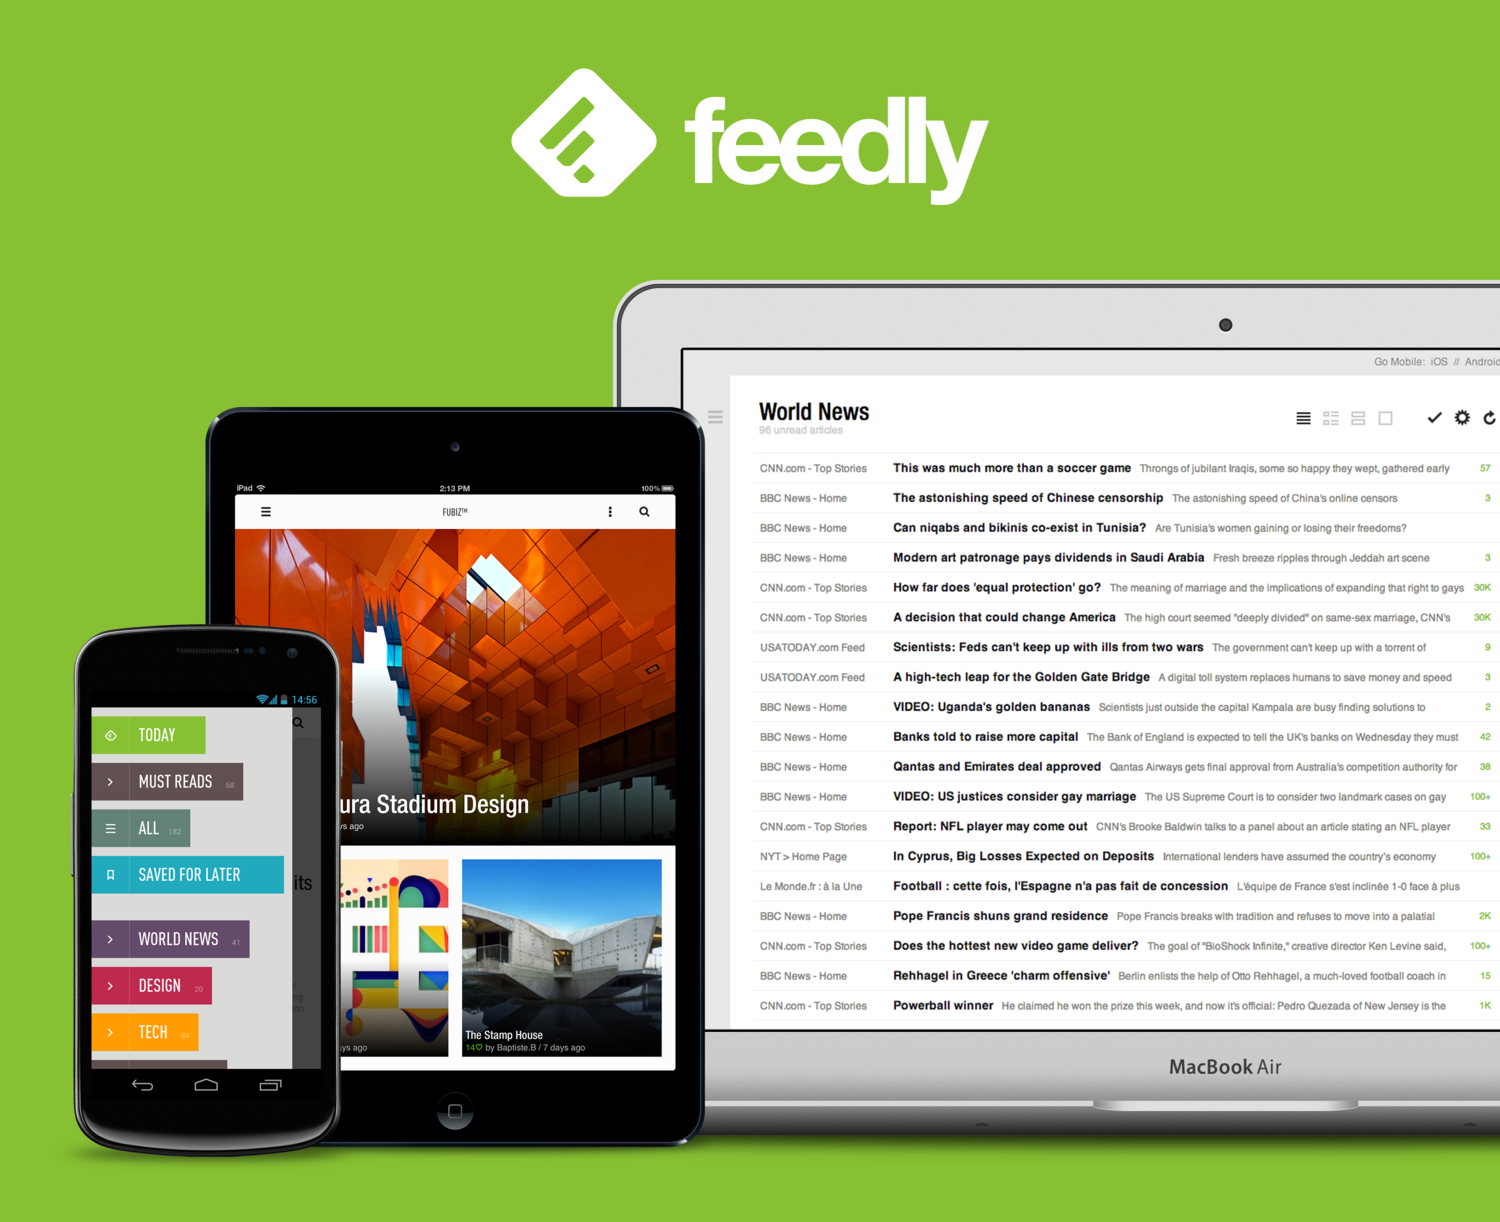 EP 21: Feedly - Tools & Tips for Content Collection Part I